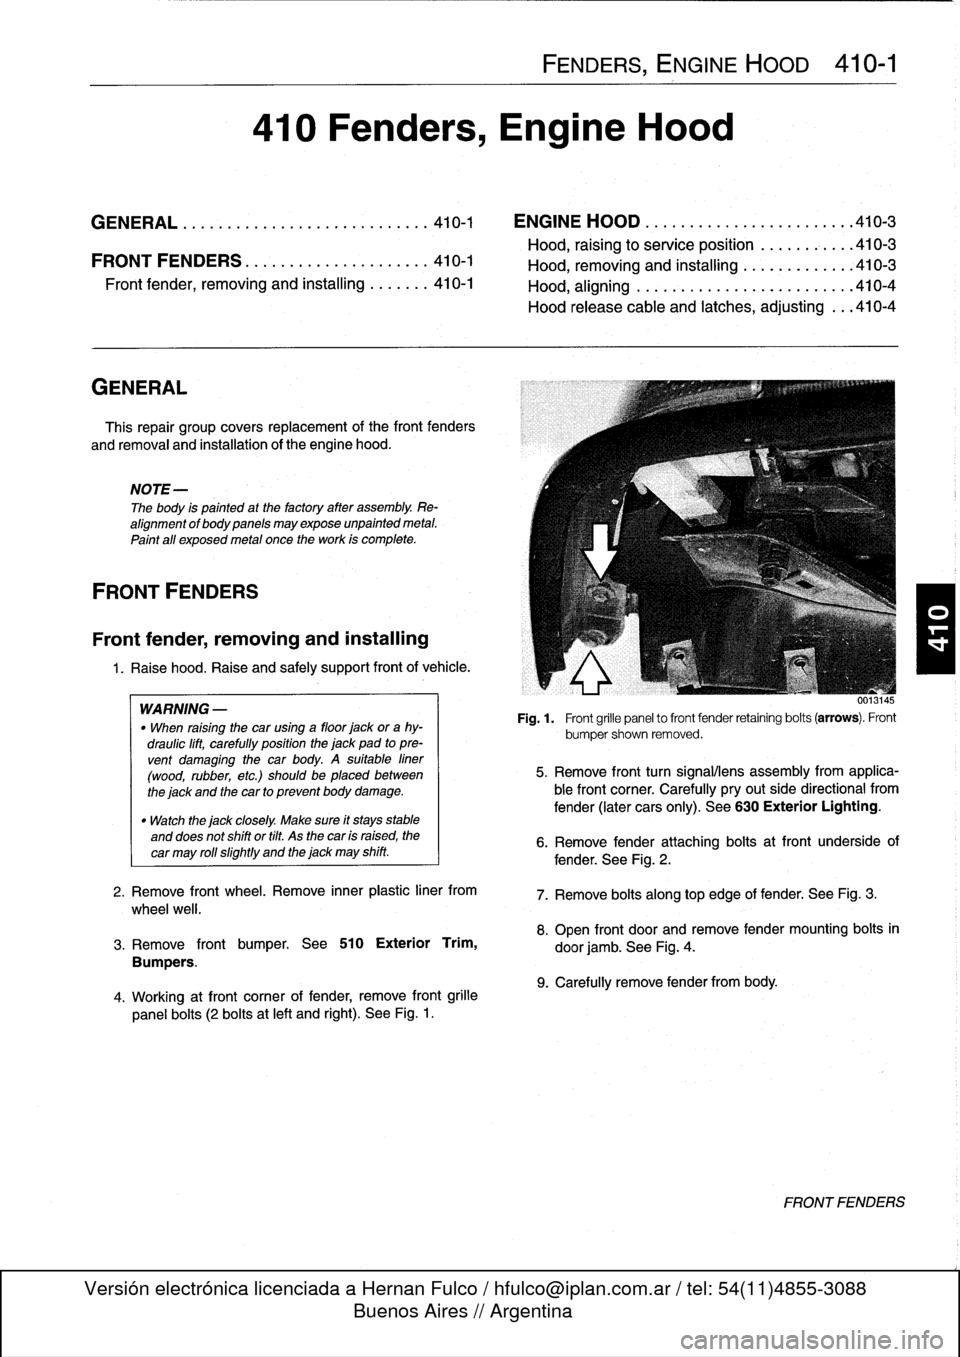 BMW 325i 1998 E36 Workshop Manual 
GENERAL

This
repair
group
covers
replacement
of
the
front
fenders

and
removal
and
installation
of
the
engine
hood
.

NOTE-

The
body
is
painted
at
the
factoryafter
assembly
.
Re-
alignment
of
body
